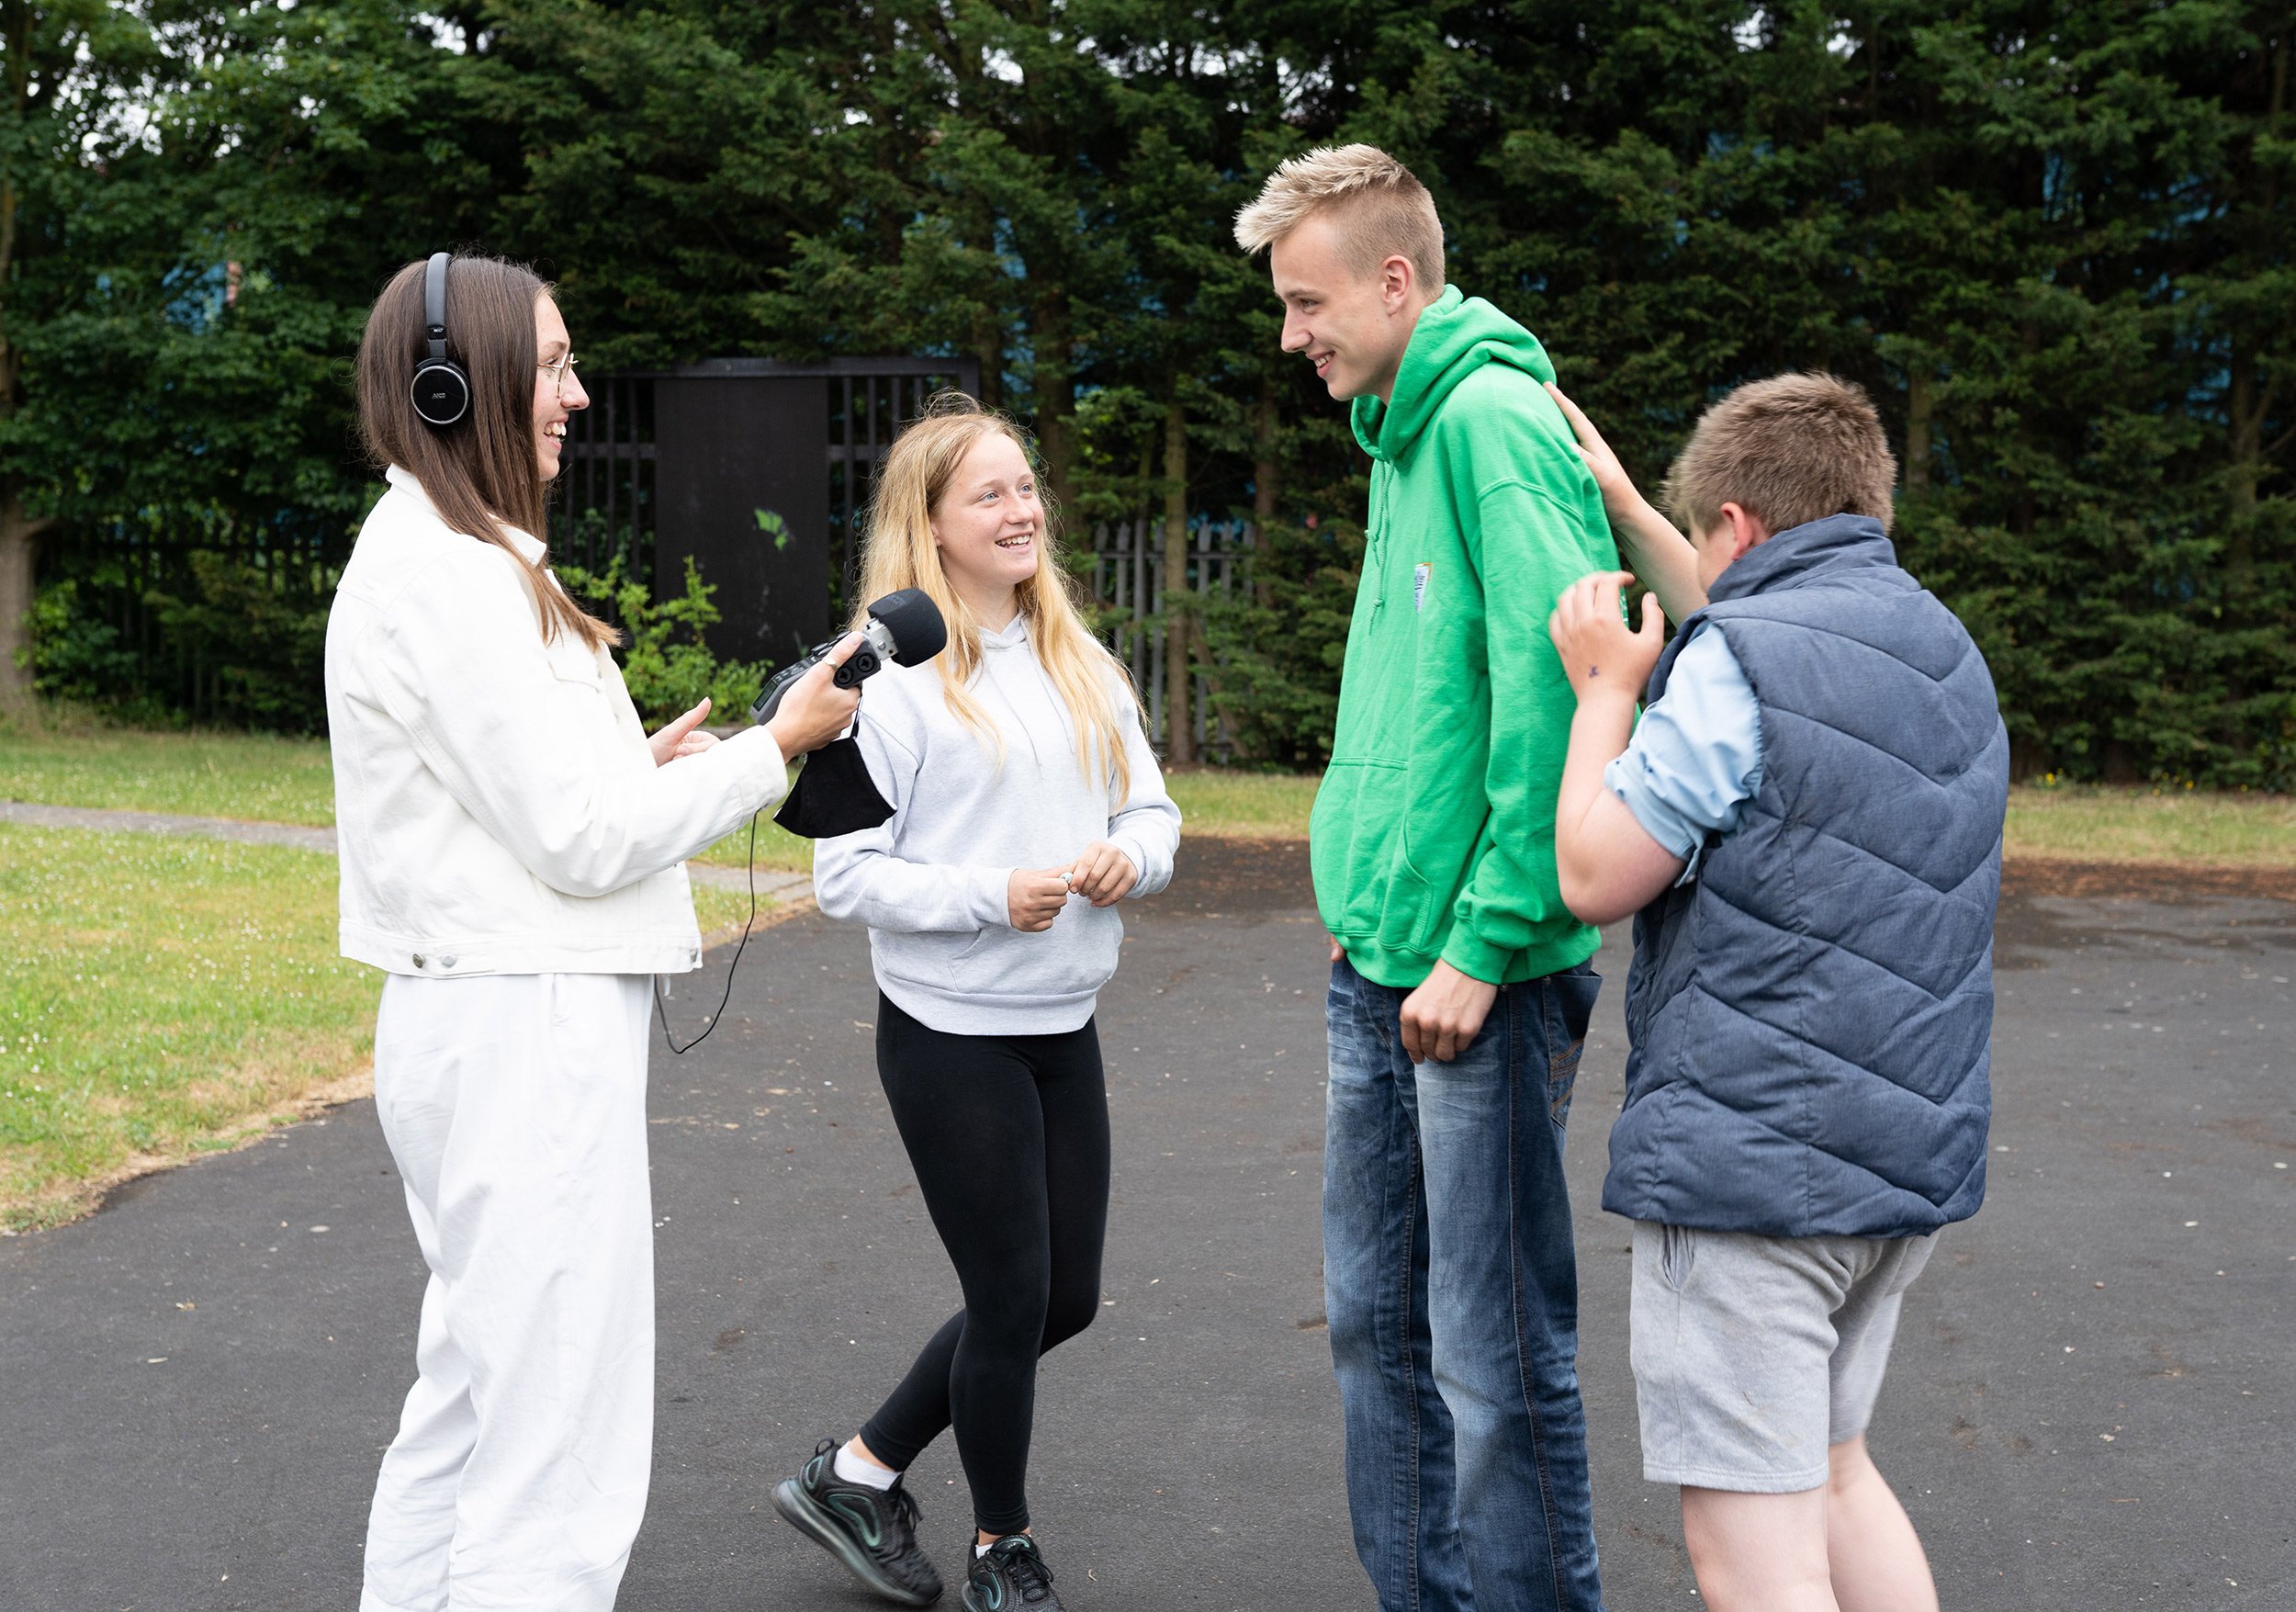 A woman holding a microphone and wearing headphones interviewing three other people